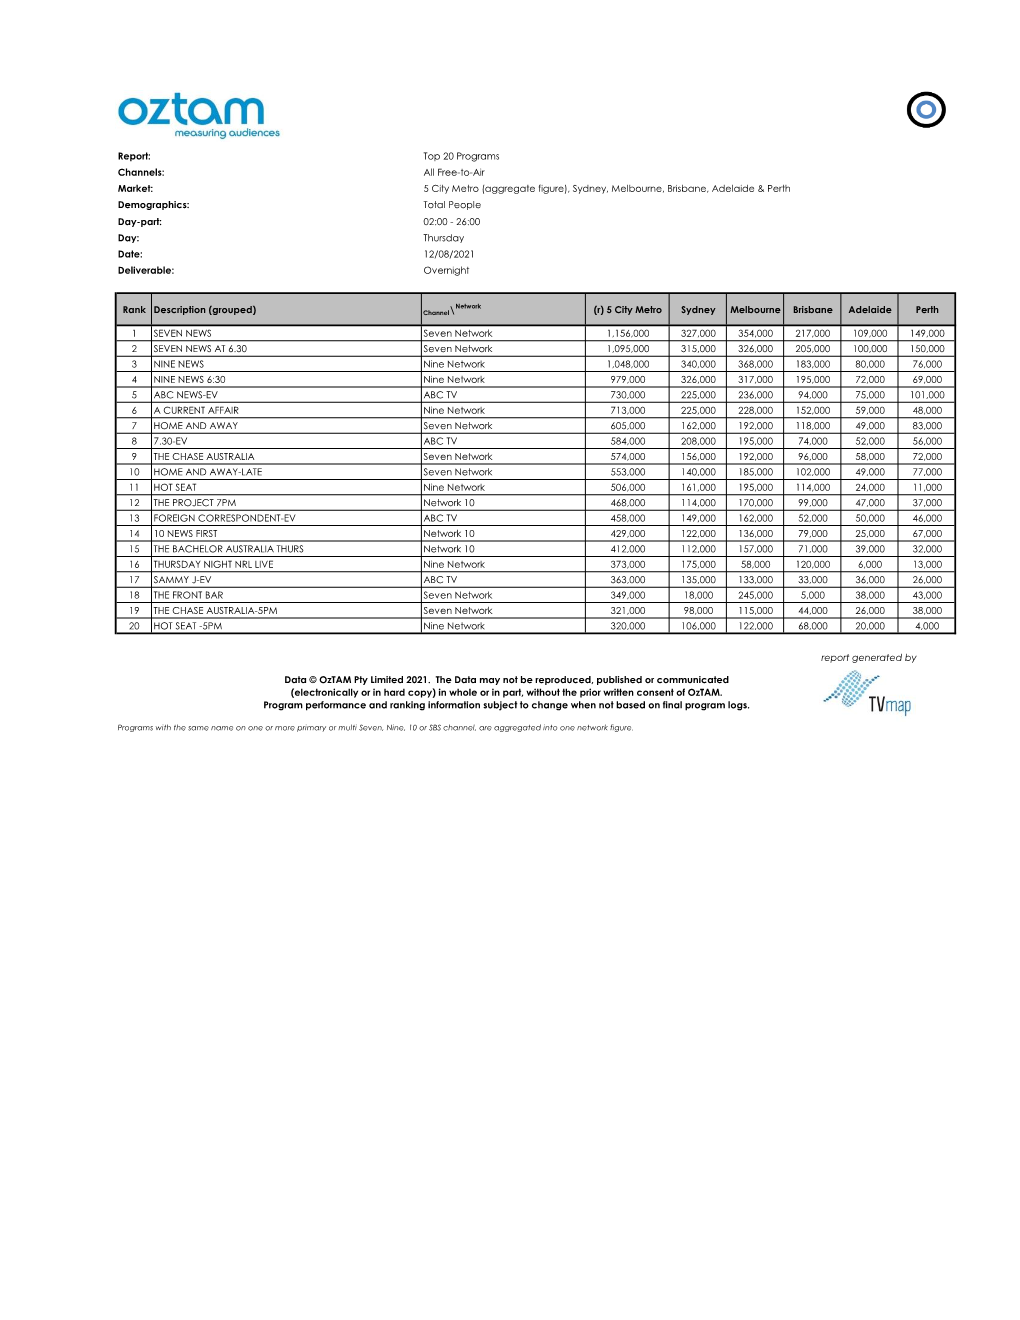 Top 20 Programs Channels: All Free-To-Air Market: 5 City Metro (Aggregate Figure), Sydney, Melbourne, Brisbane, Adelaide & P